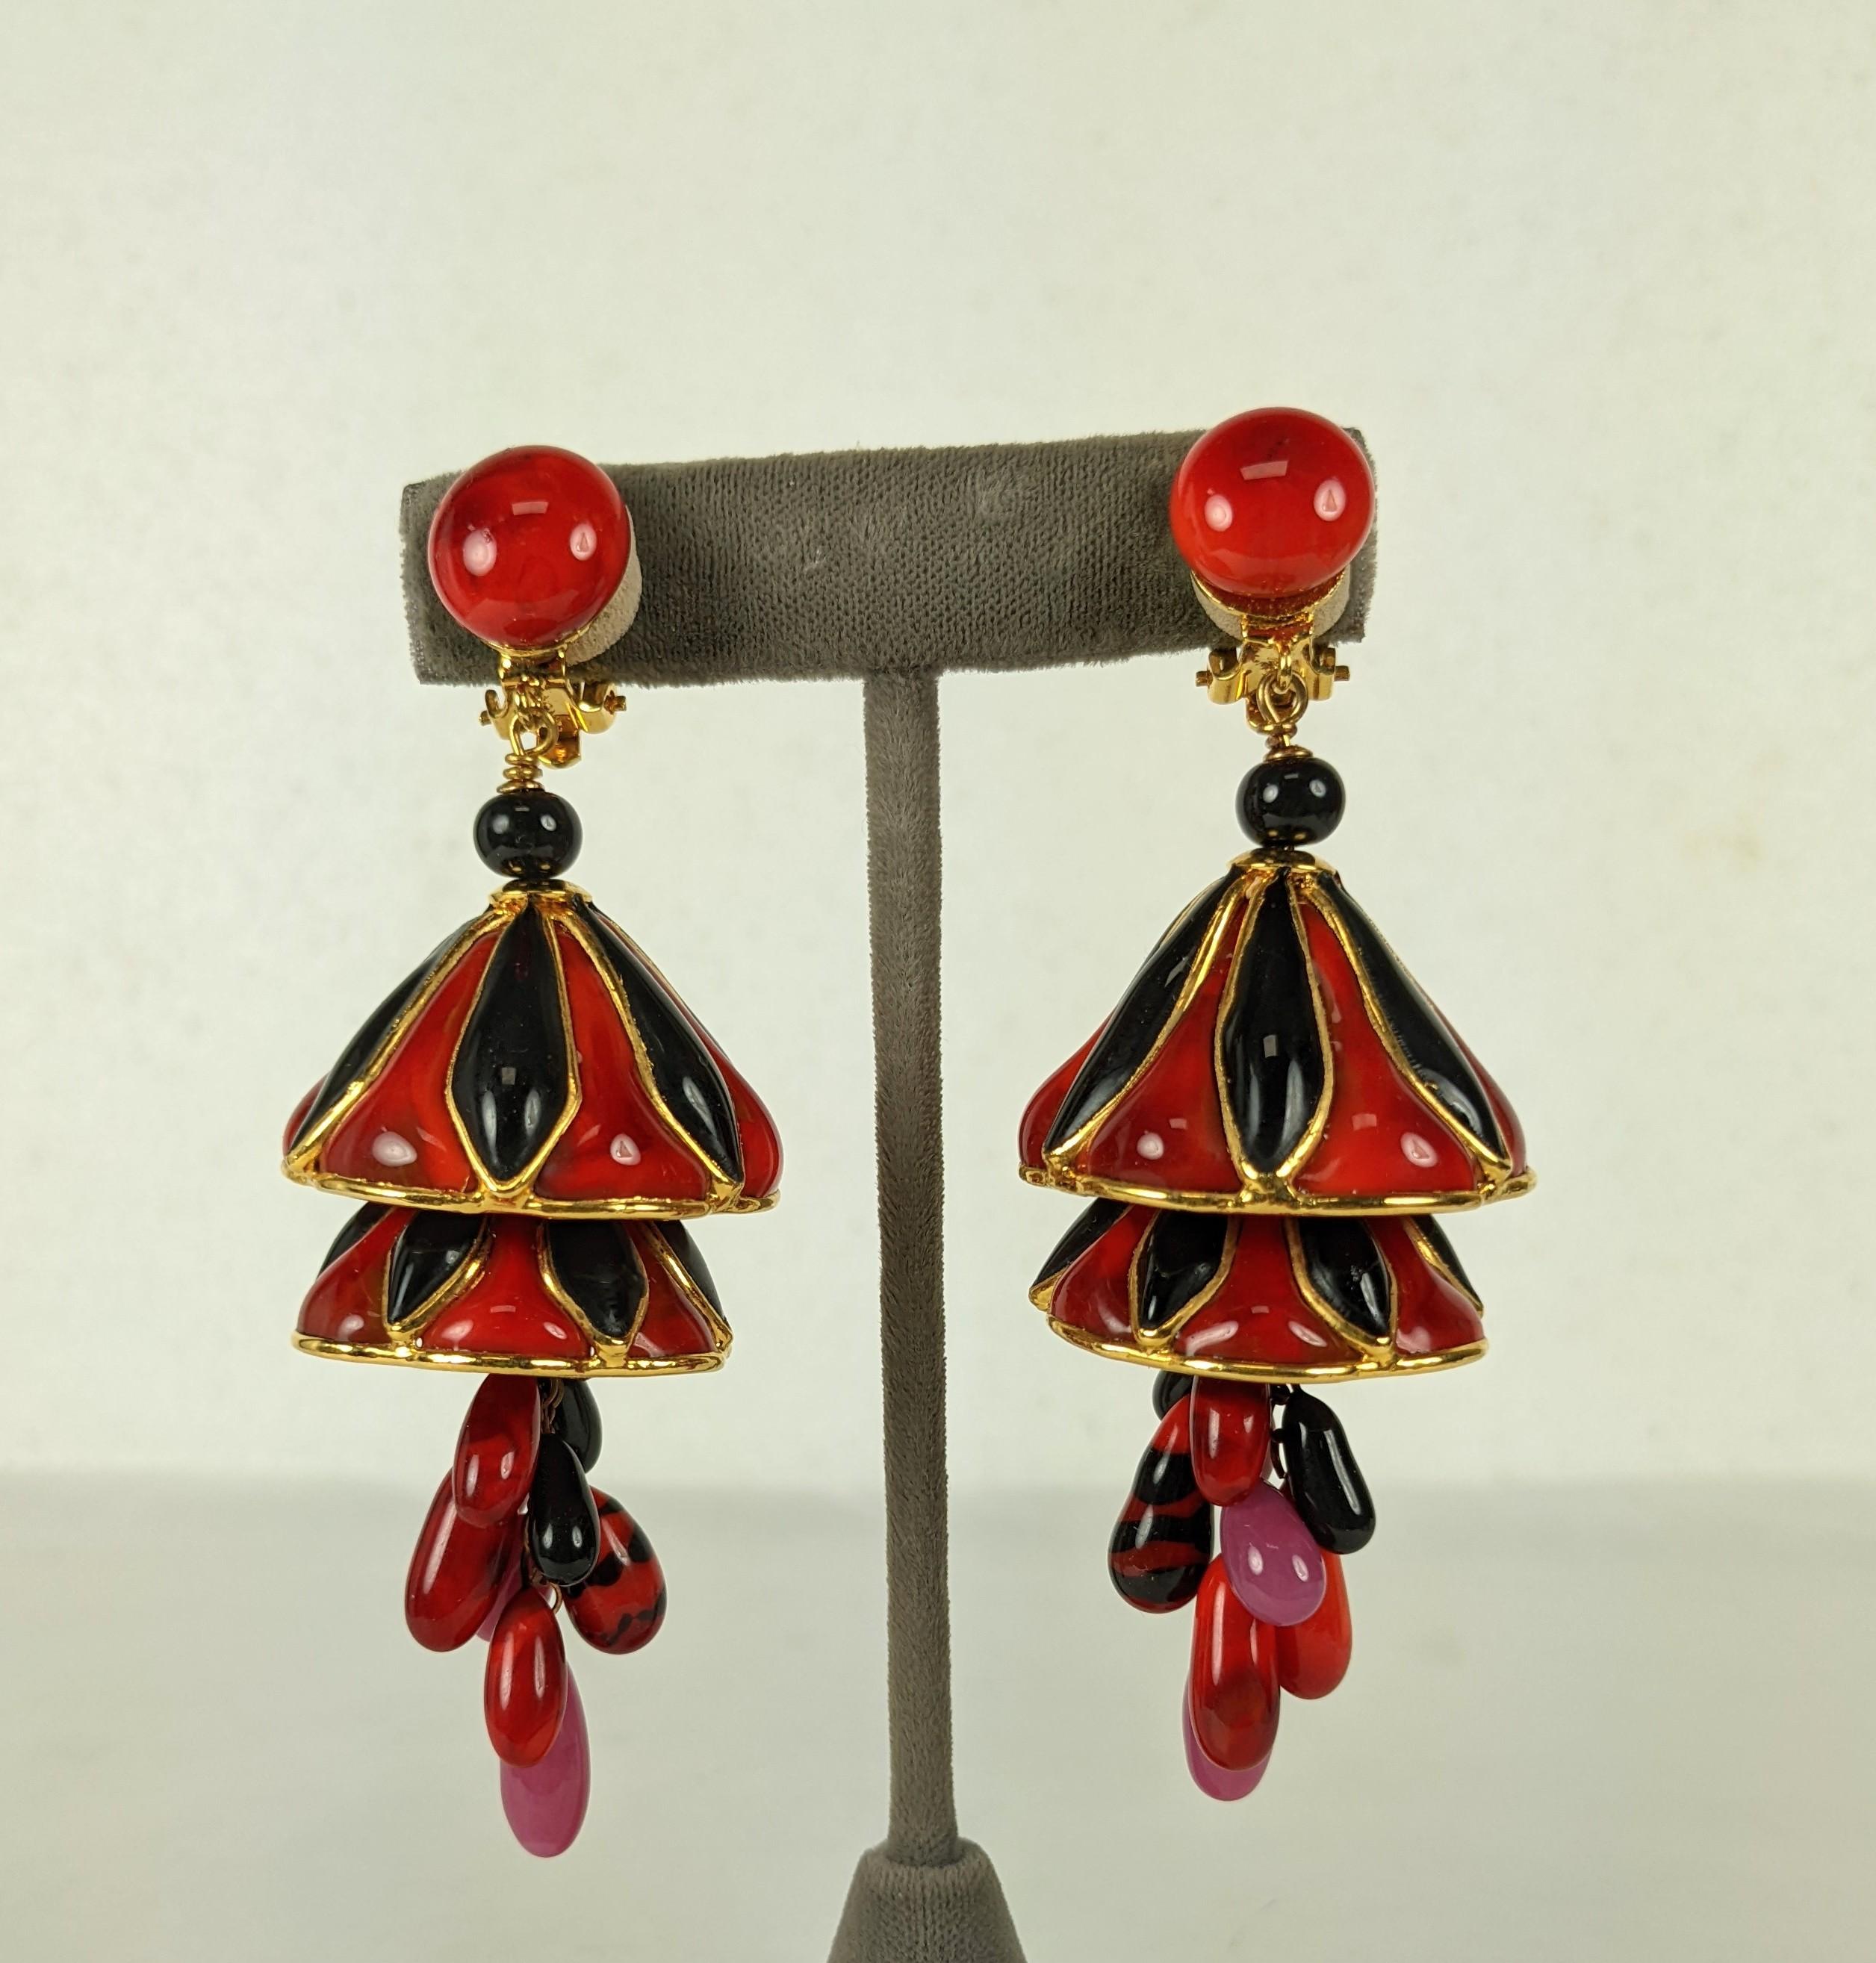 Rare Maison Gripoix for Yves Saint Laurent from Fall/Winter 1977 Chinese Collection earclips. The hand made long double lotus blossoms of deep coral and black Gripoix Glass poured enamel. Enhanced with a cluster of tonal teardrop glass stamens.